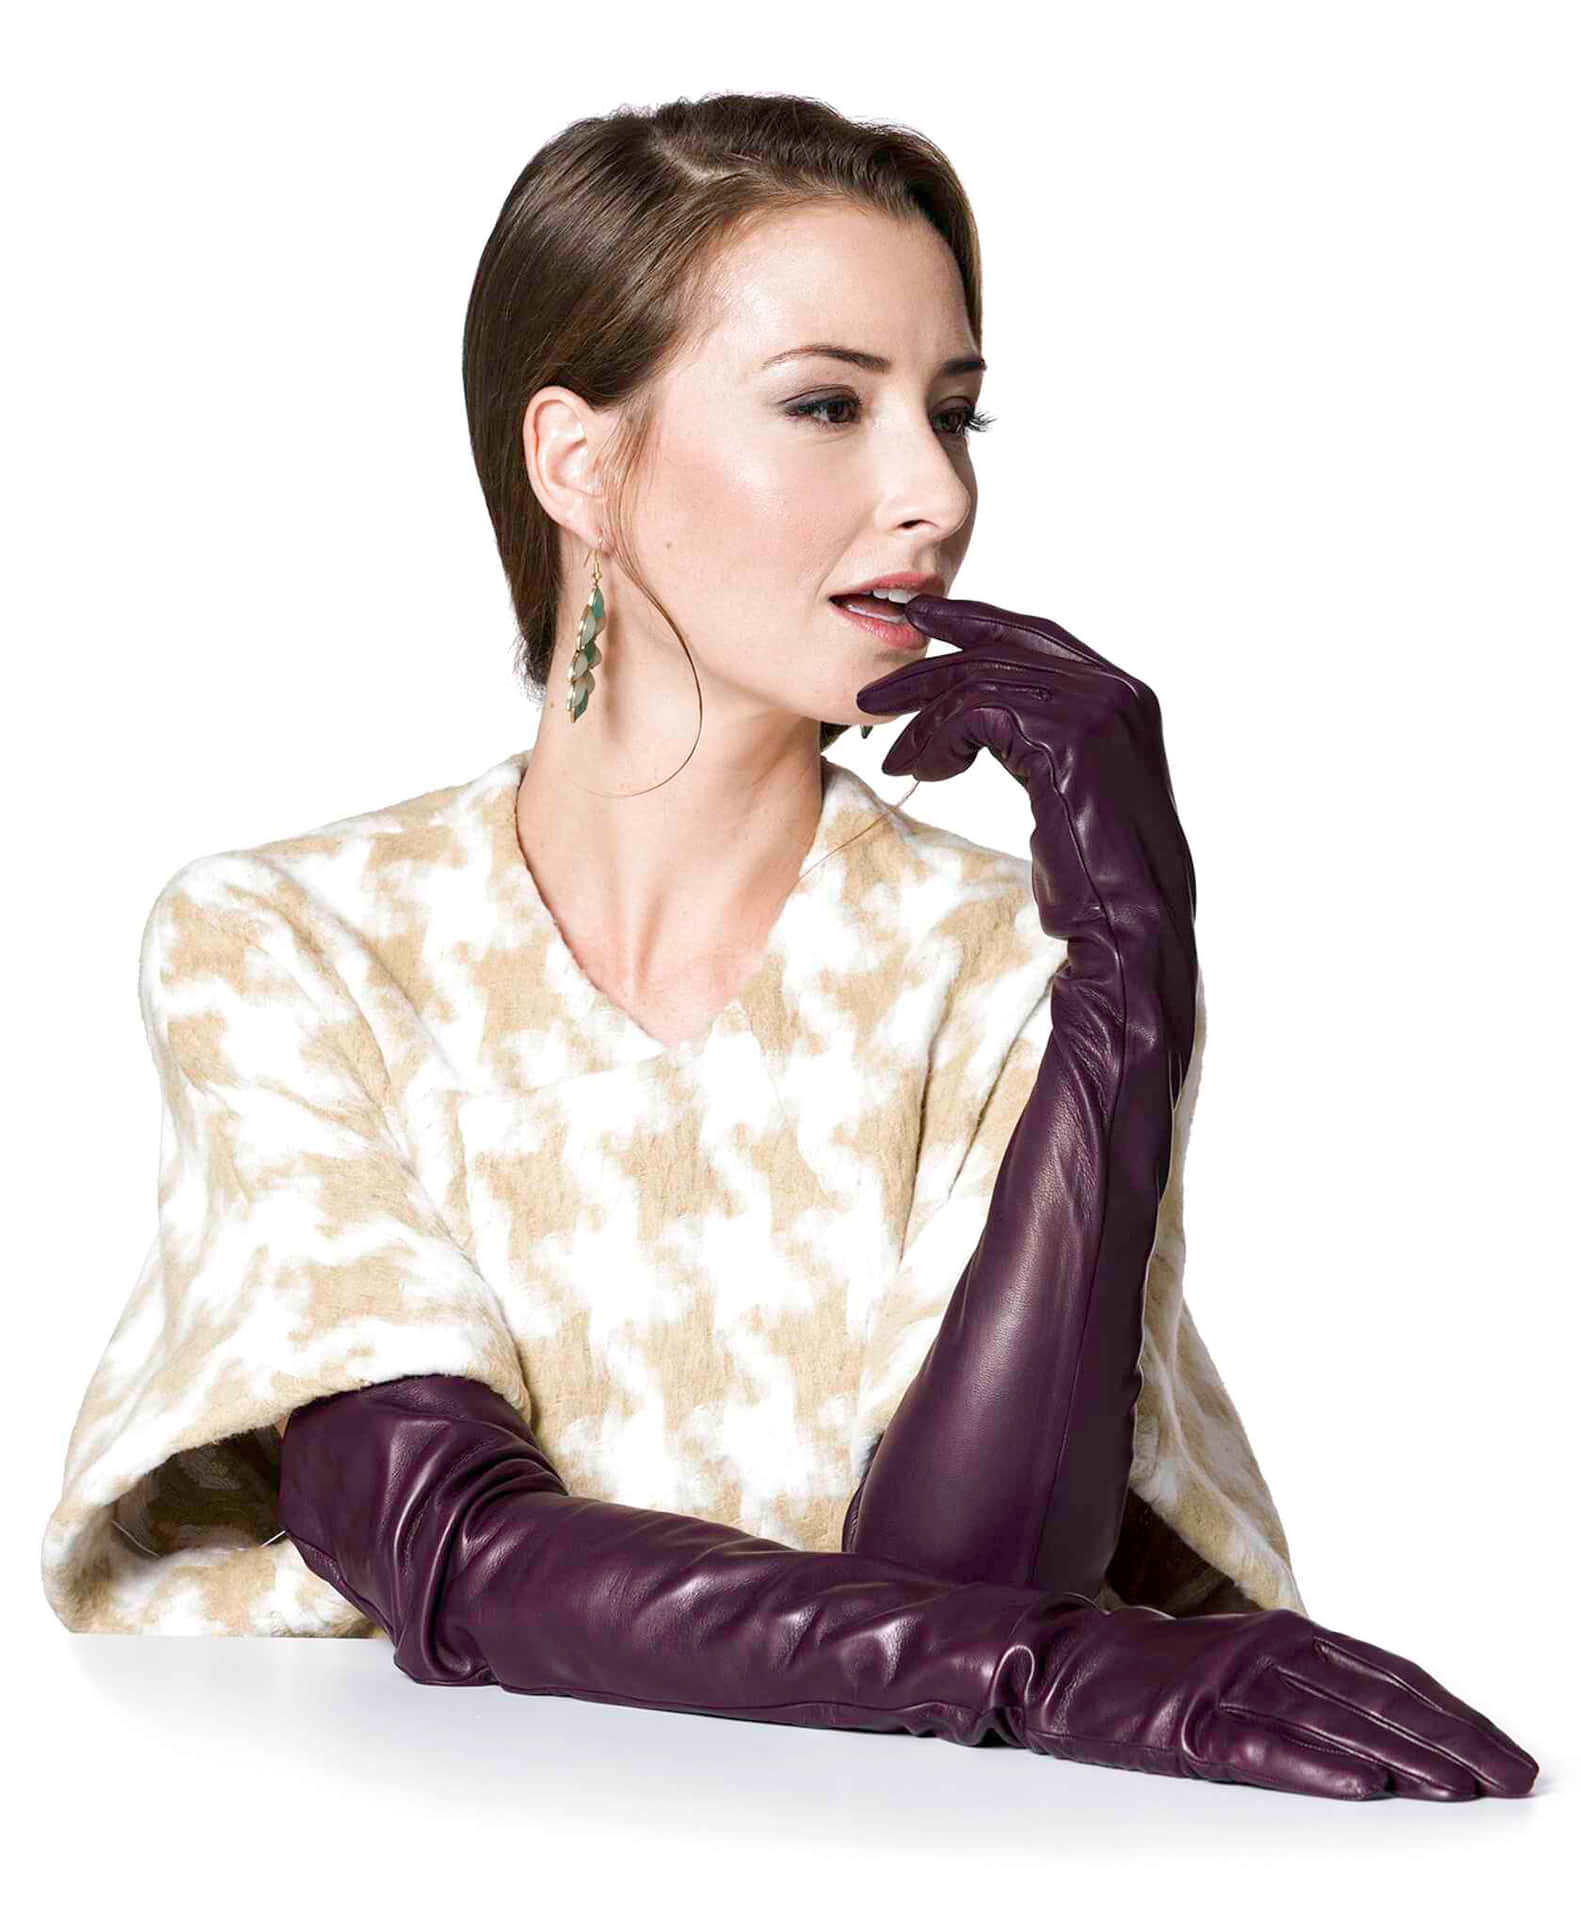 Purple Gloves - Stand Out in Style Wallpaper